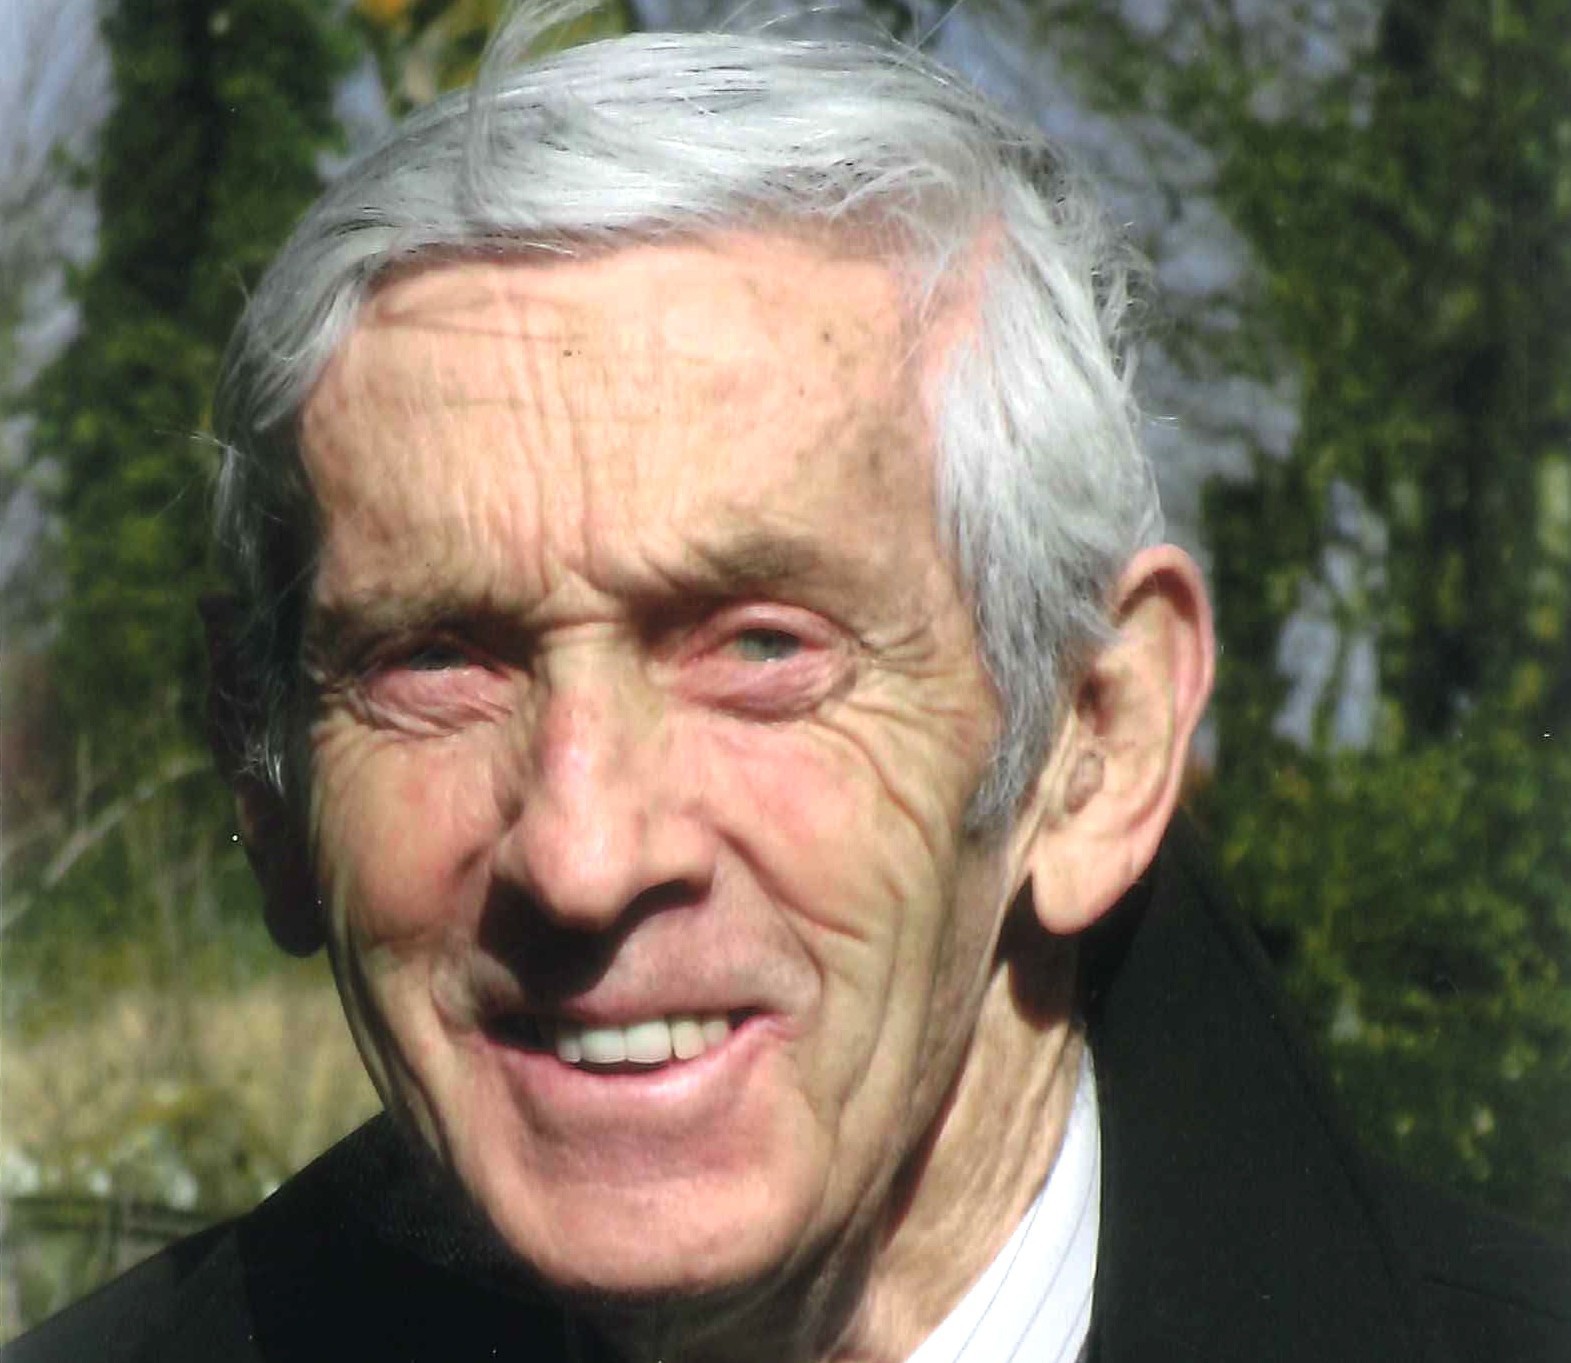 Bob Benzies, the former managing director of family business Culross the printers, has died aged 85.